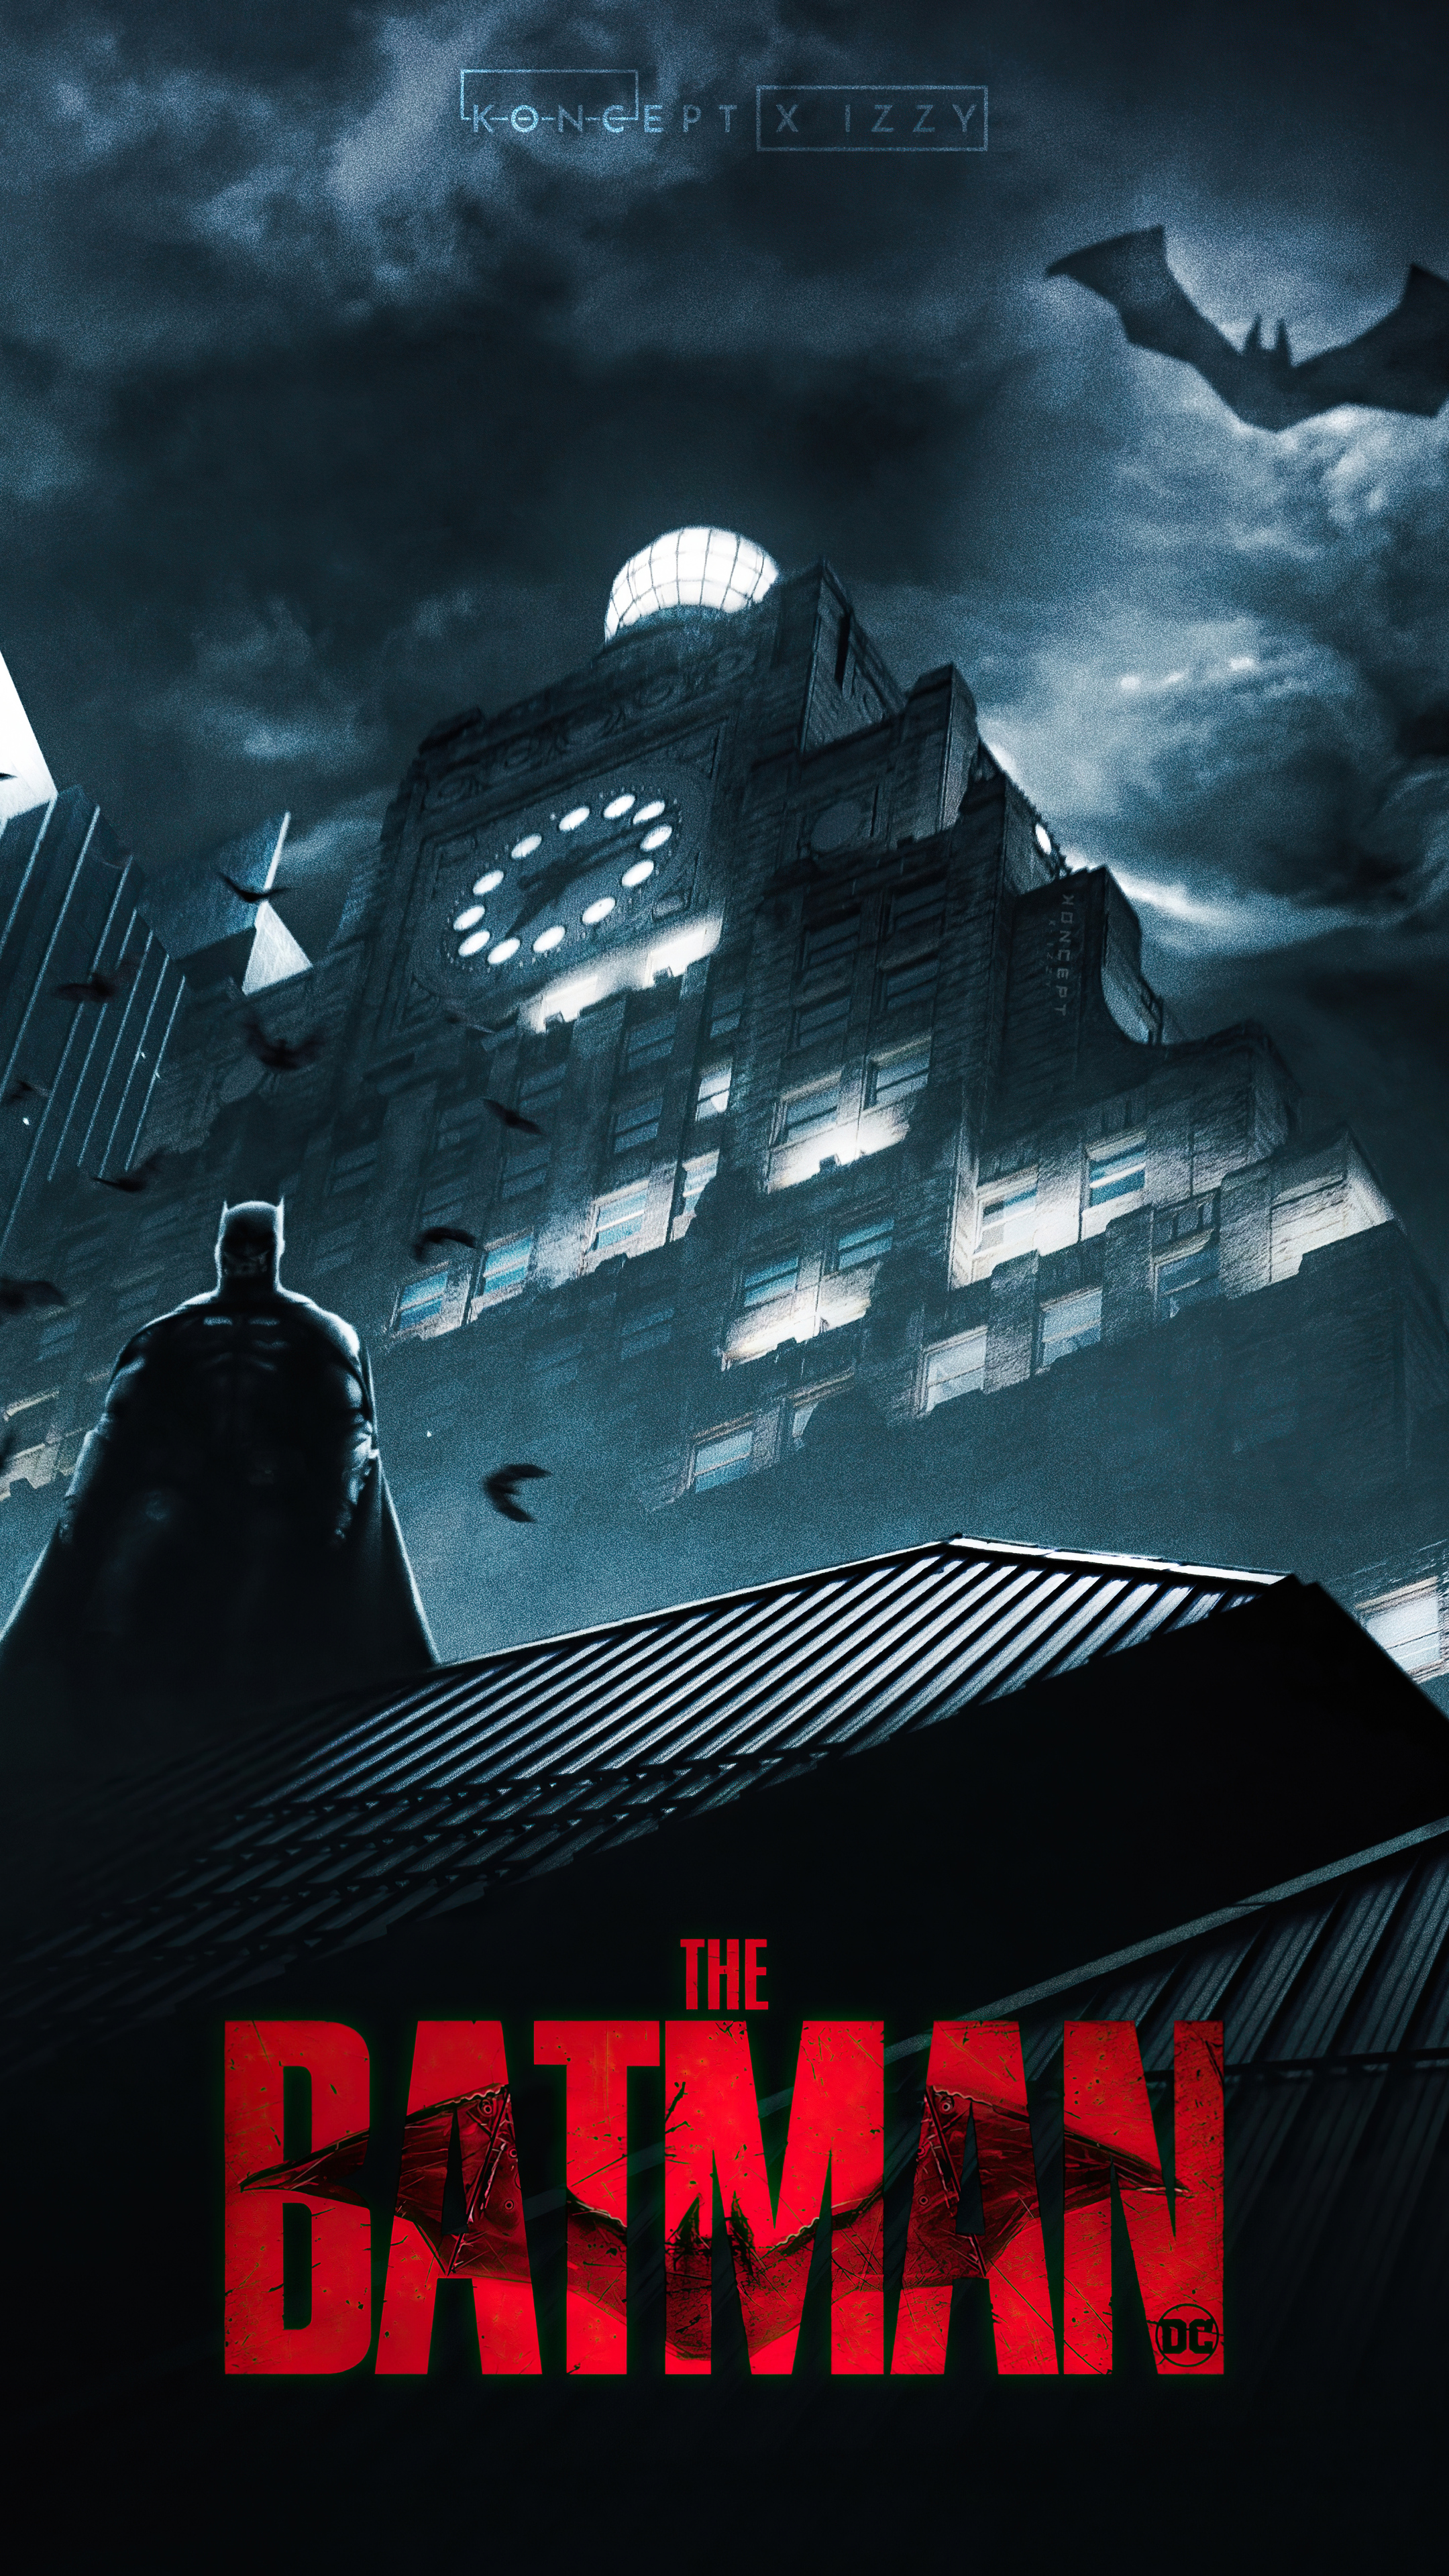 2160x3840 The Batman 2022 Fanart Sony Xperia X,XZ,Z5 Premium HD 4k Wallpapers, Image, Backgrounds, Photos and Pictures